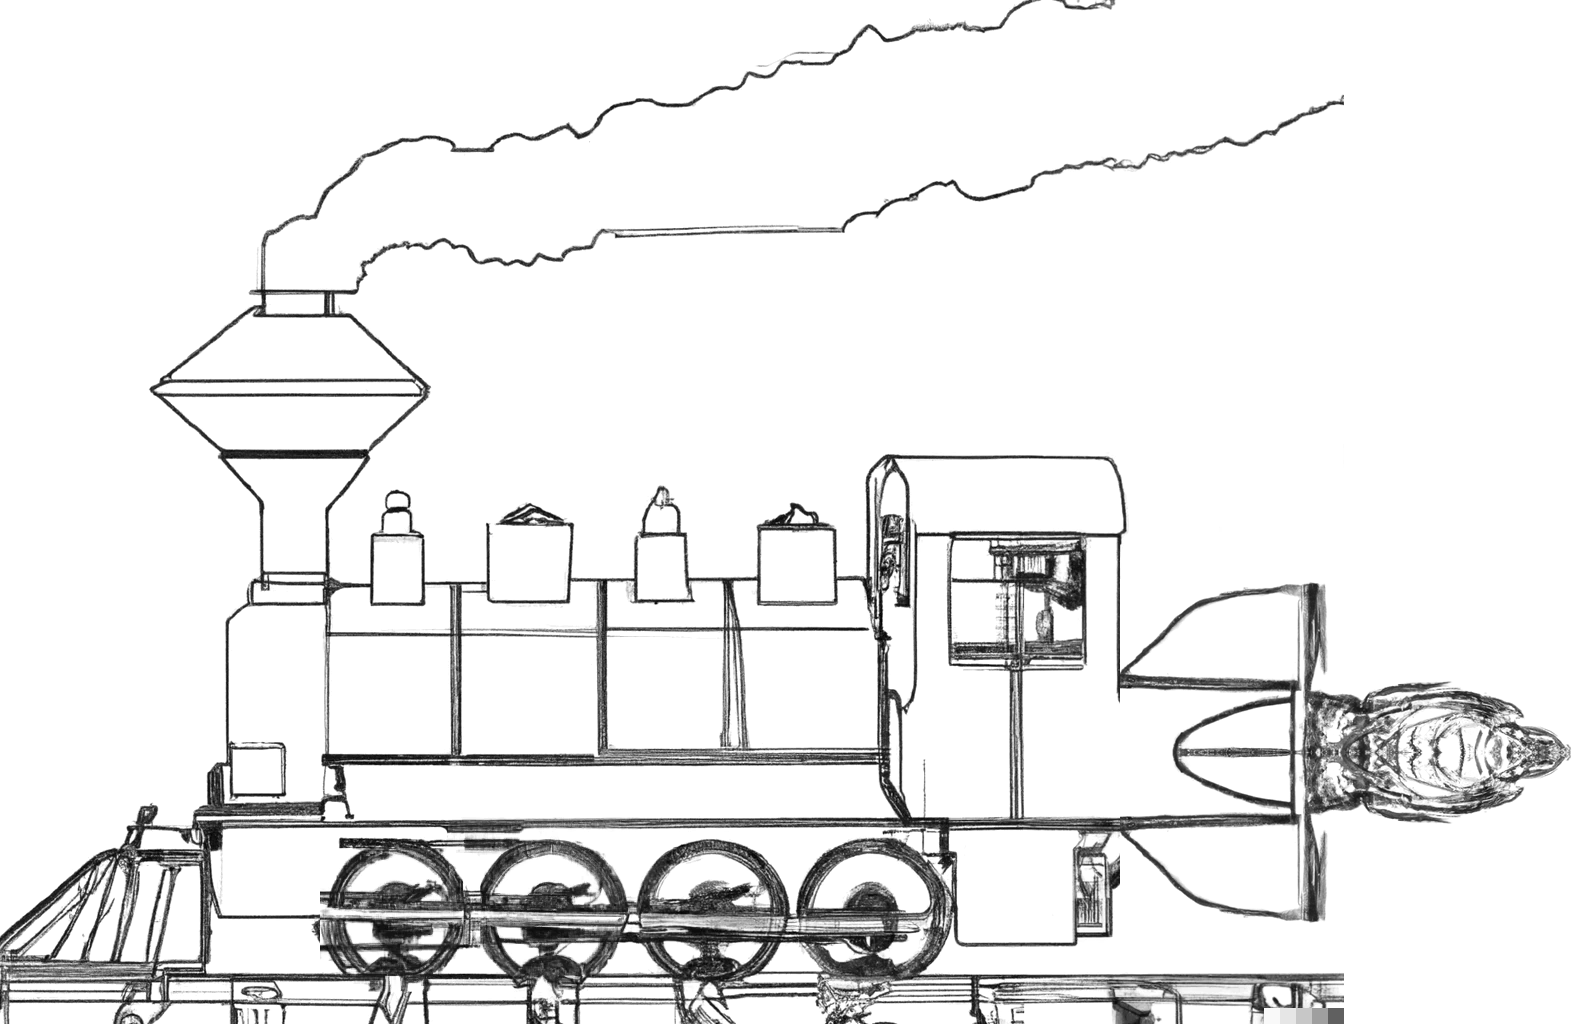 Smoking steam engine with running rocket engine tacked to the rear end, pencil sketch, hand assembled from images generated by DALL-E 2